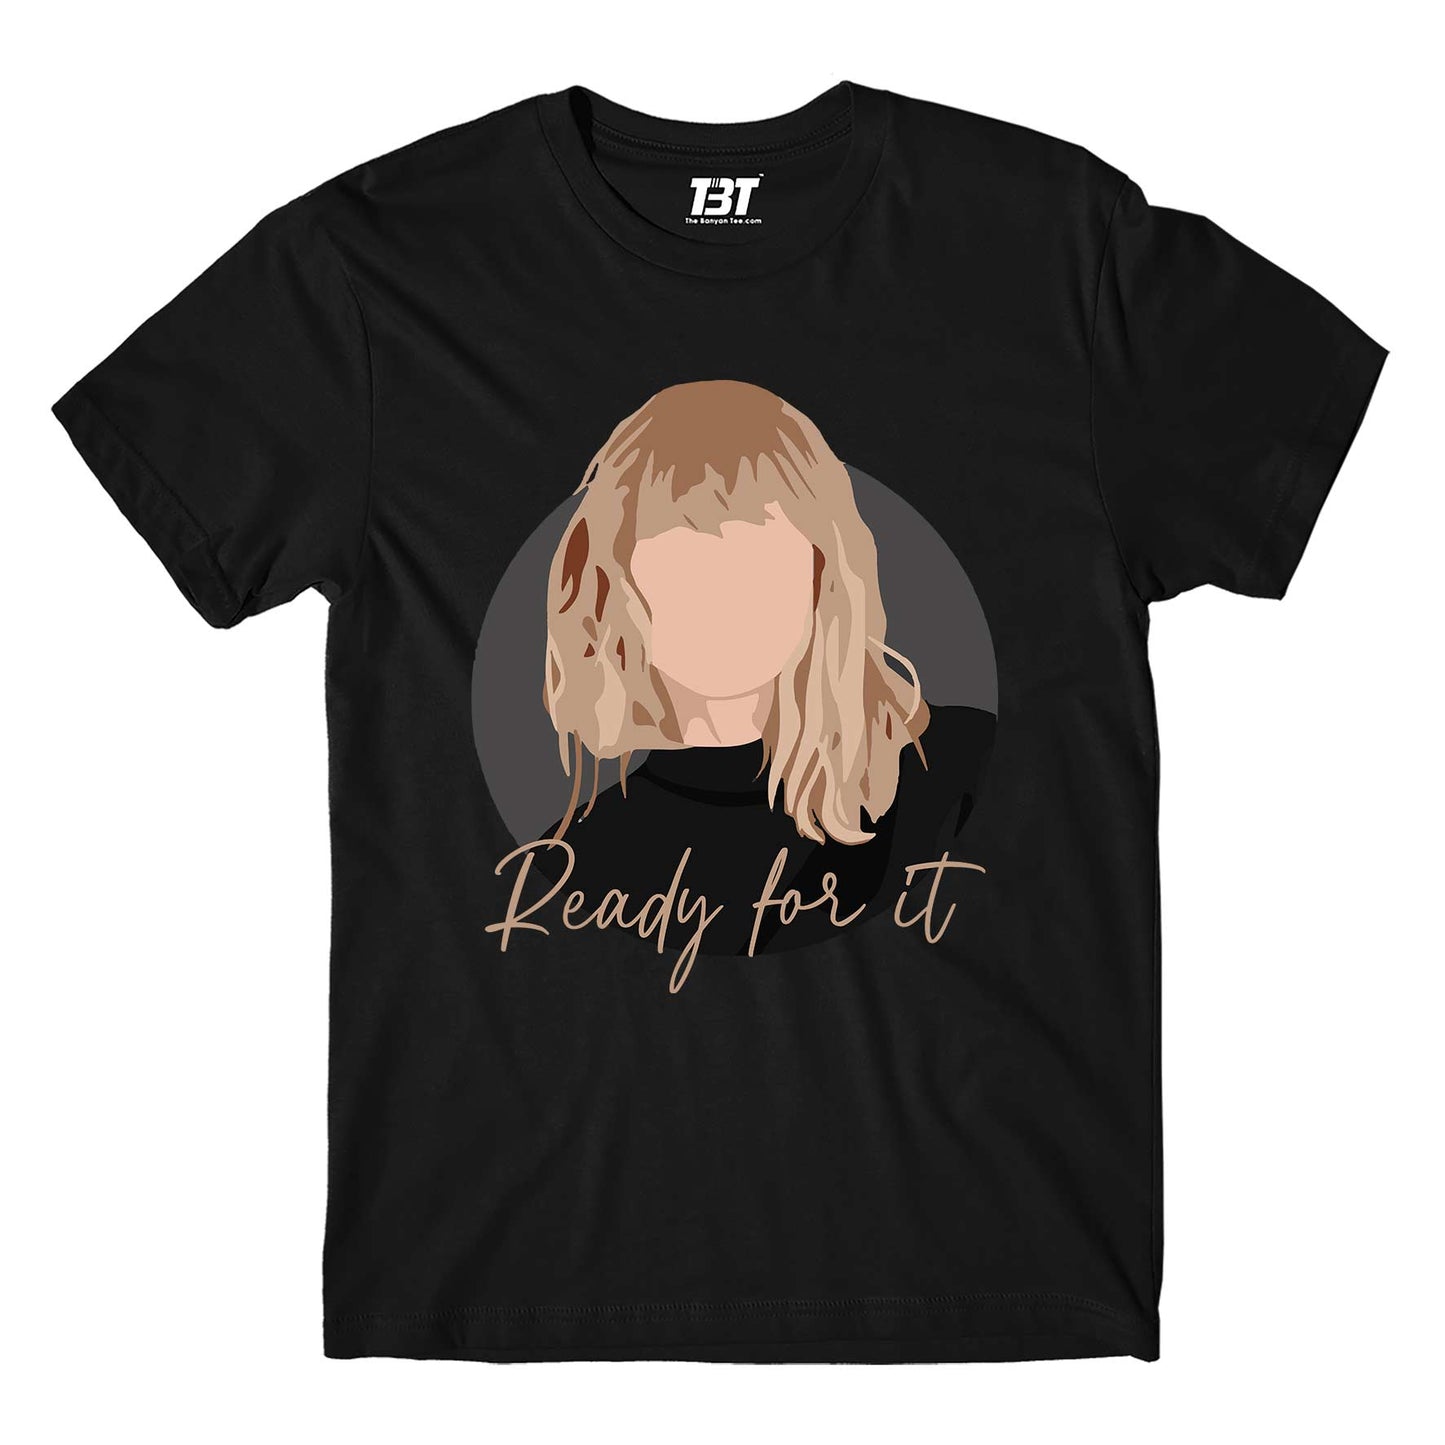 taylor swift ready for it t-shirt music band buy online usa united states the banyan tee tbt men women girls boys unisex black